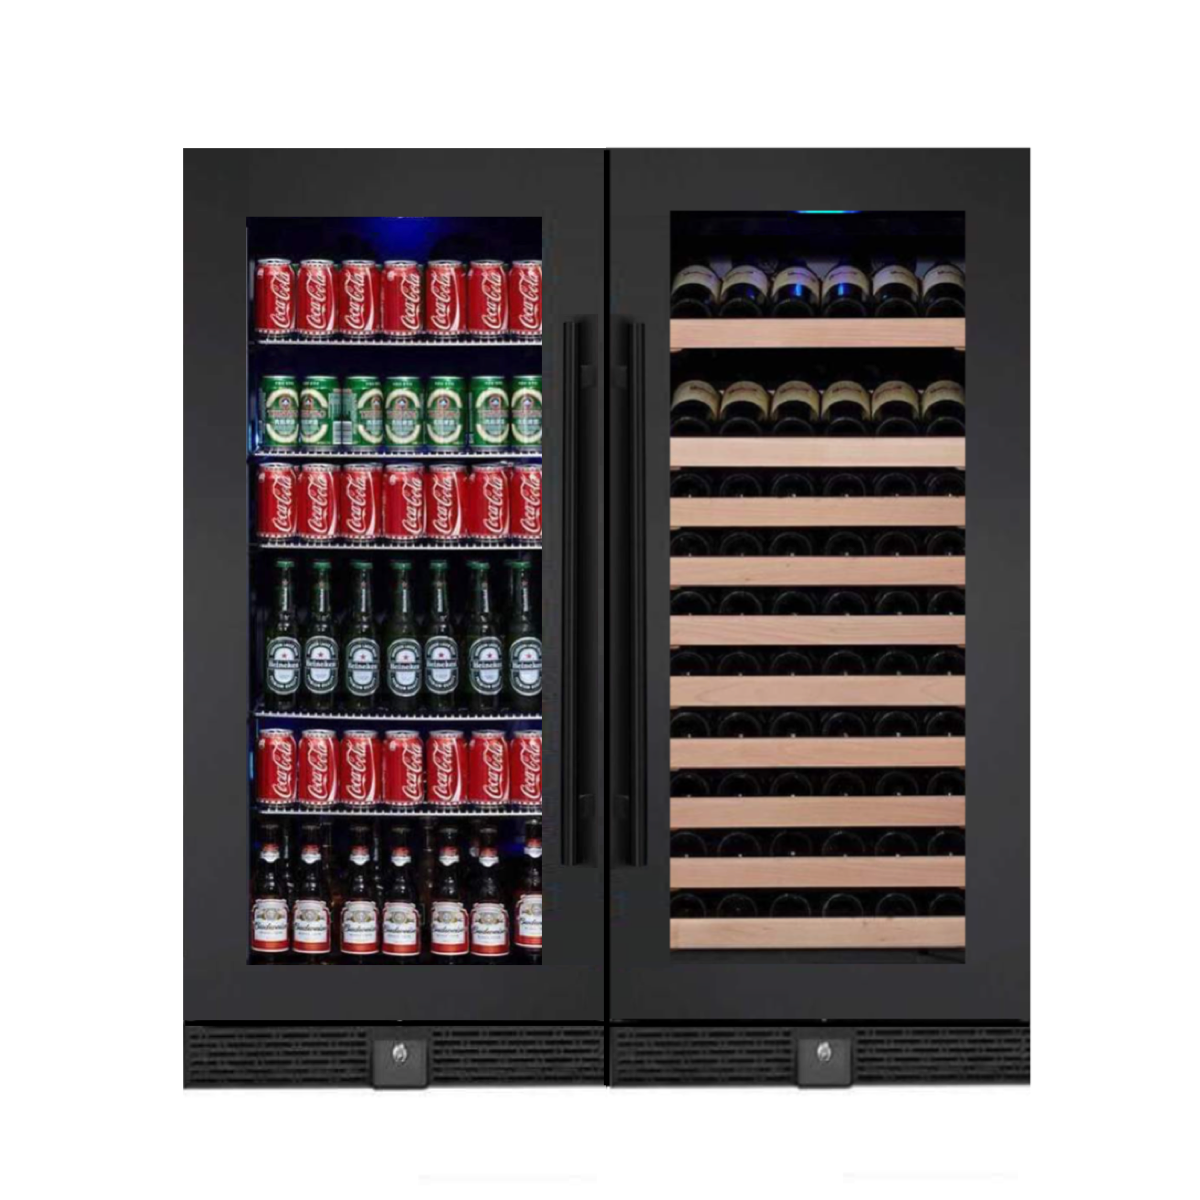 A black refrigerator filled with beer bottles and soda cans, along with a wine rack and shelves of more bottles and cans.